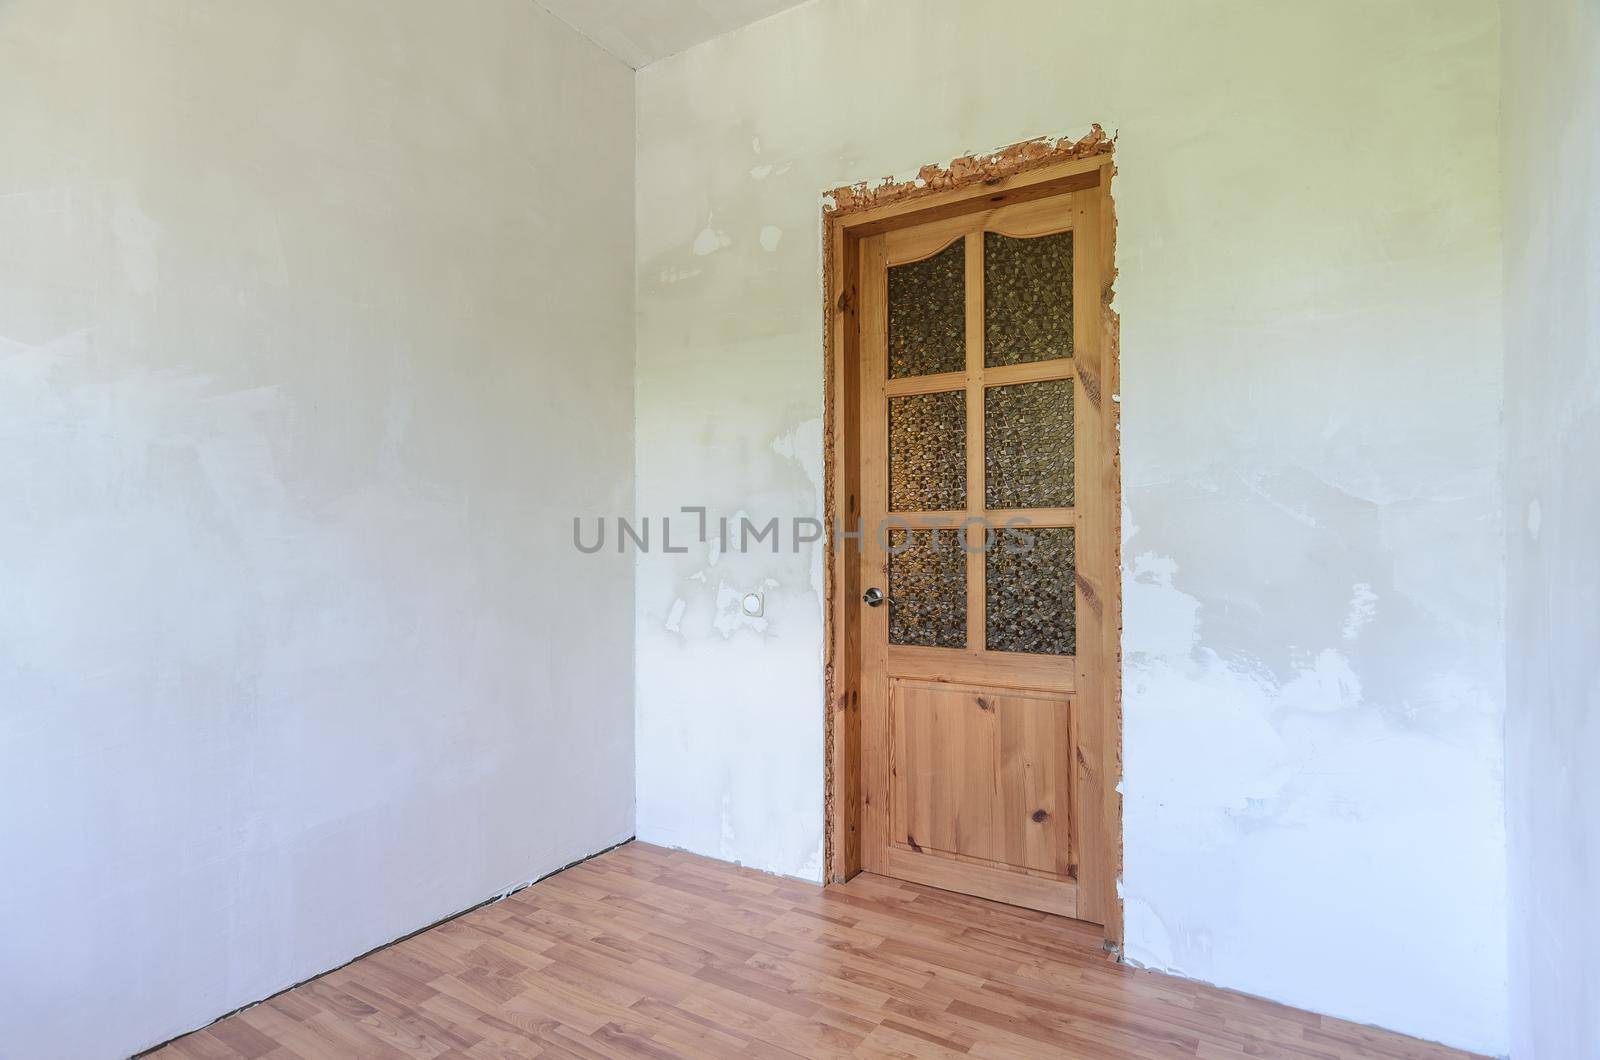 View of the front door in a small room after renovation by Madhourse